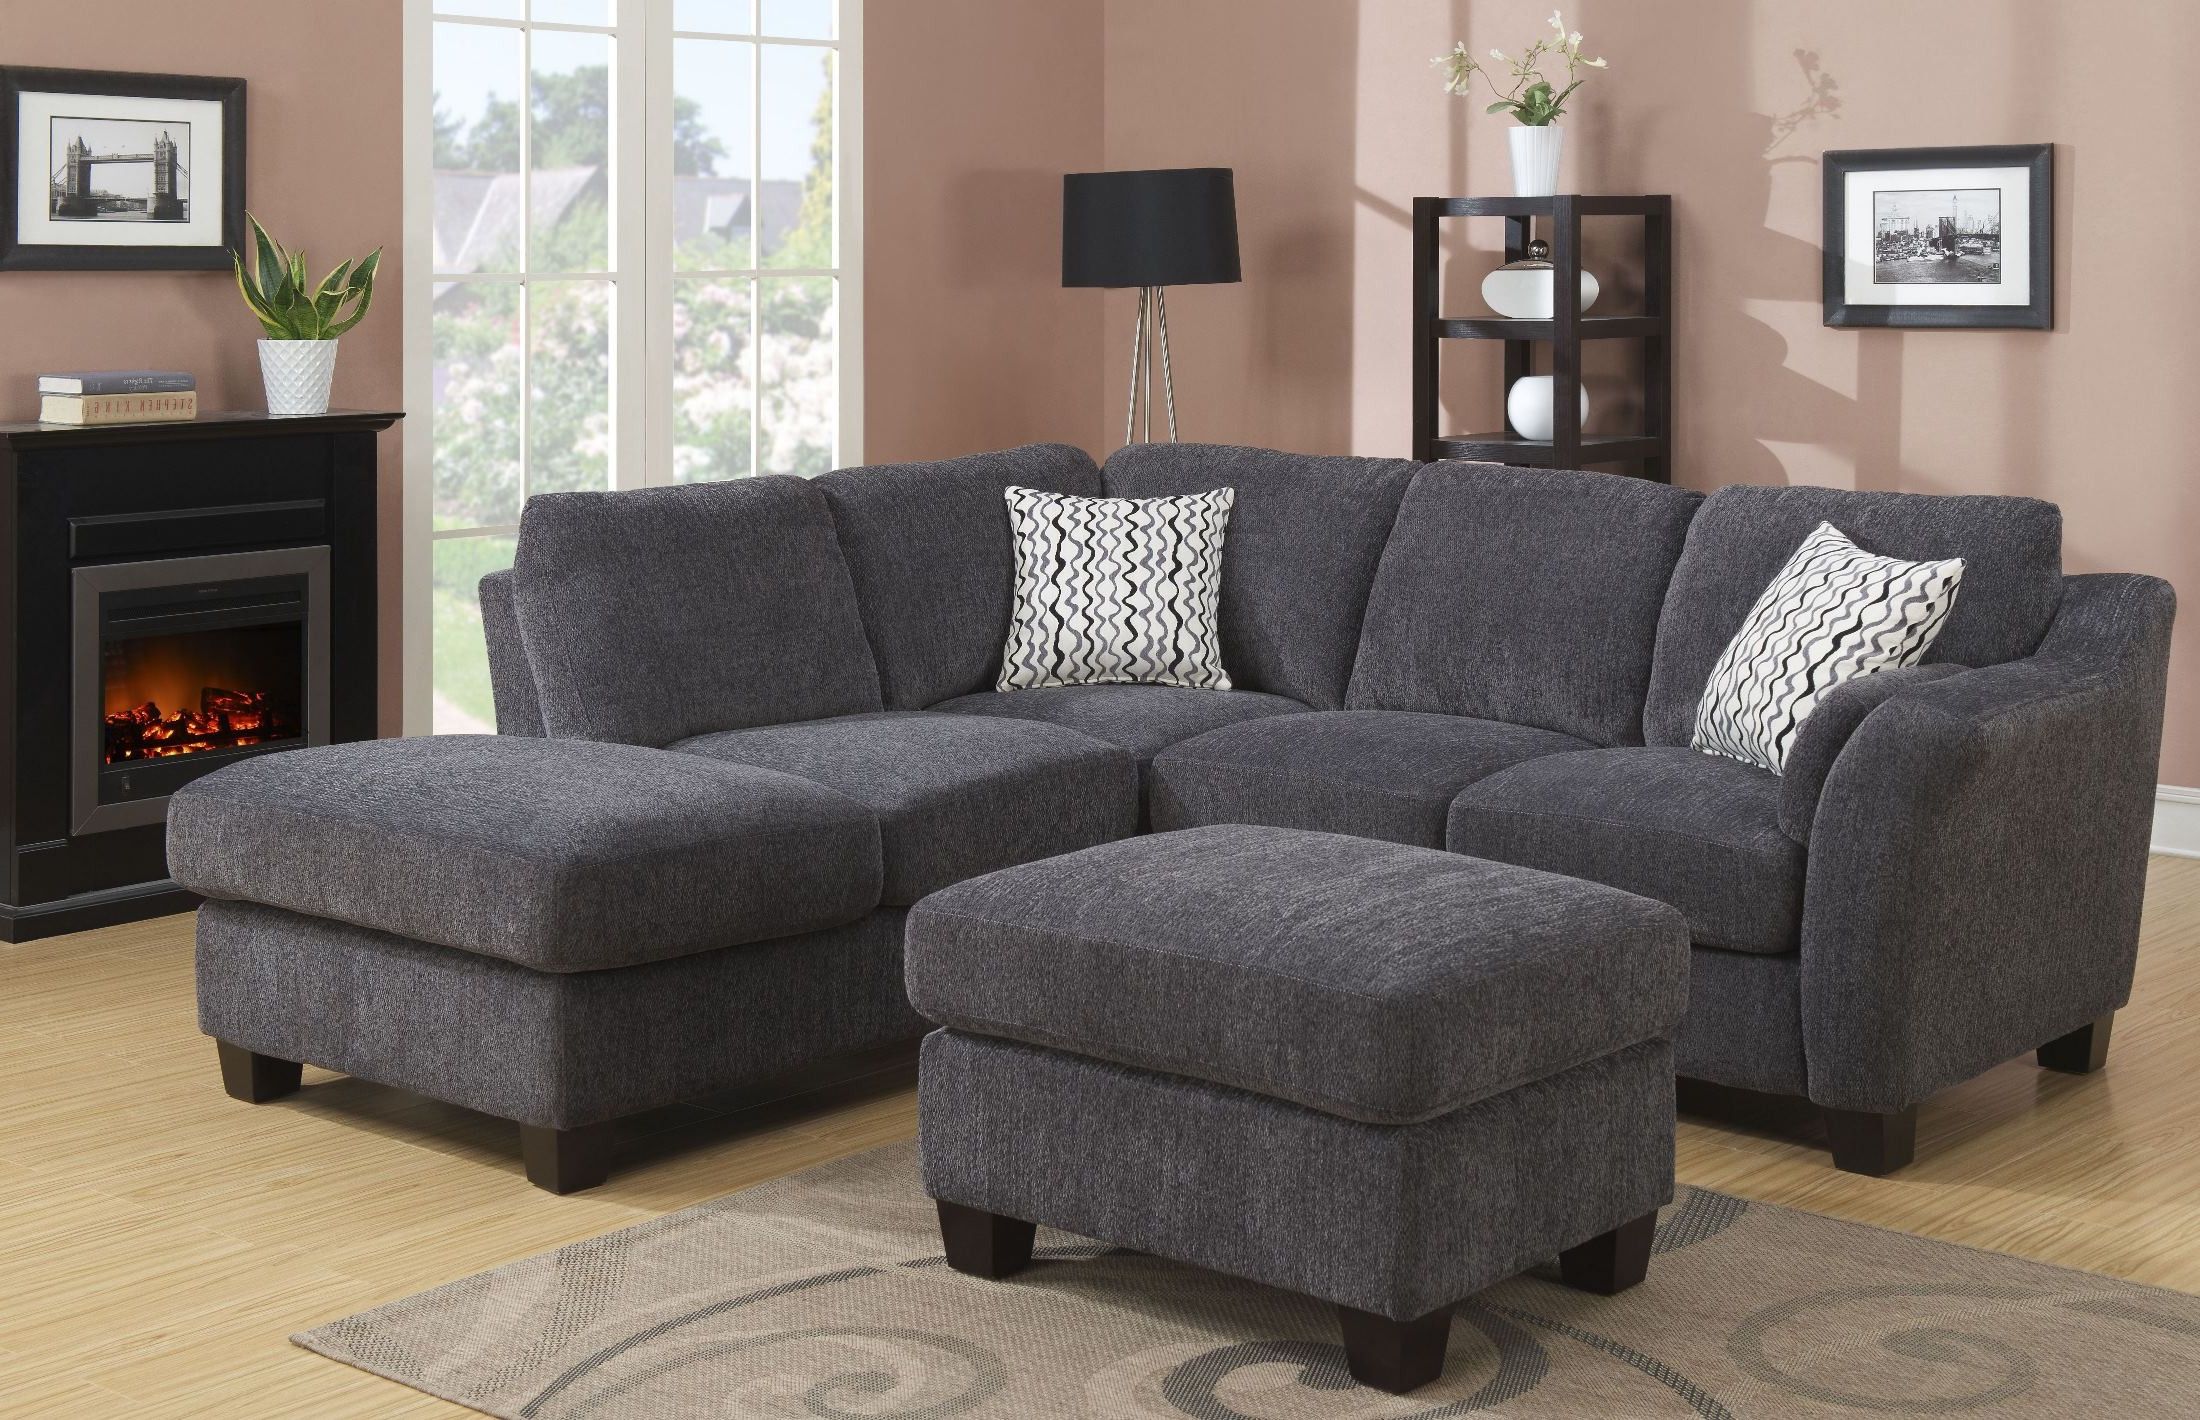 Clayton Ii Charcoal 2 Piece Sectional, U8060e 11 12 23 K For Most Recent 2pc Burland Contemporary Sectional Sofas Charcoal (Photo 23 of 25)